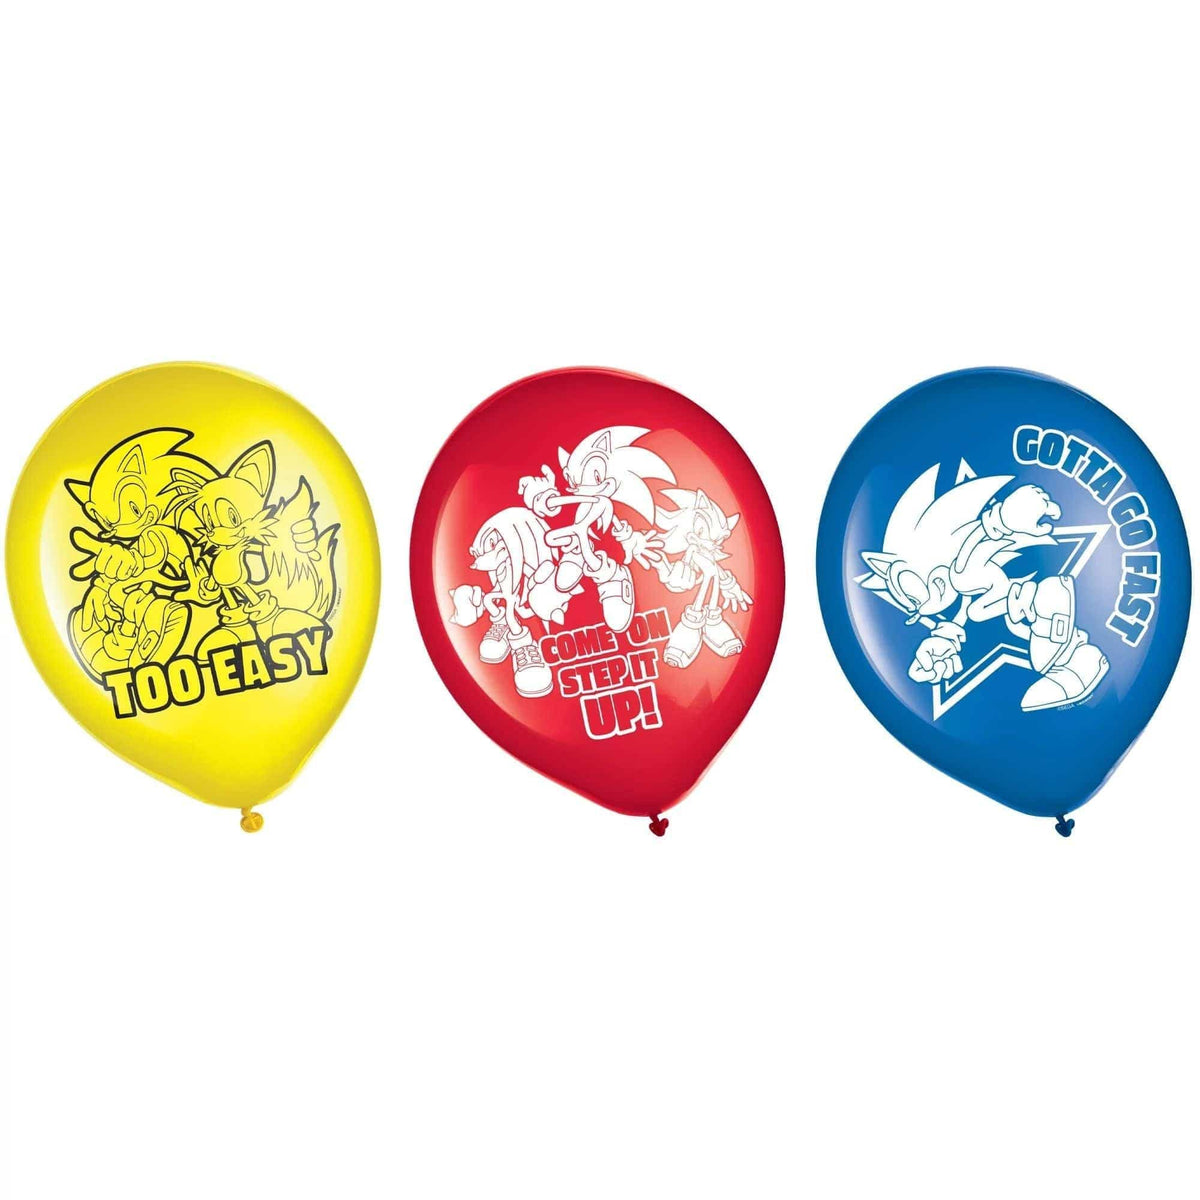 AMSCAN CA Kids Birthday Sonic the Hedgehog Latex Balloons, 12 in, 6 Count